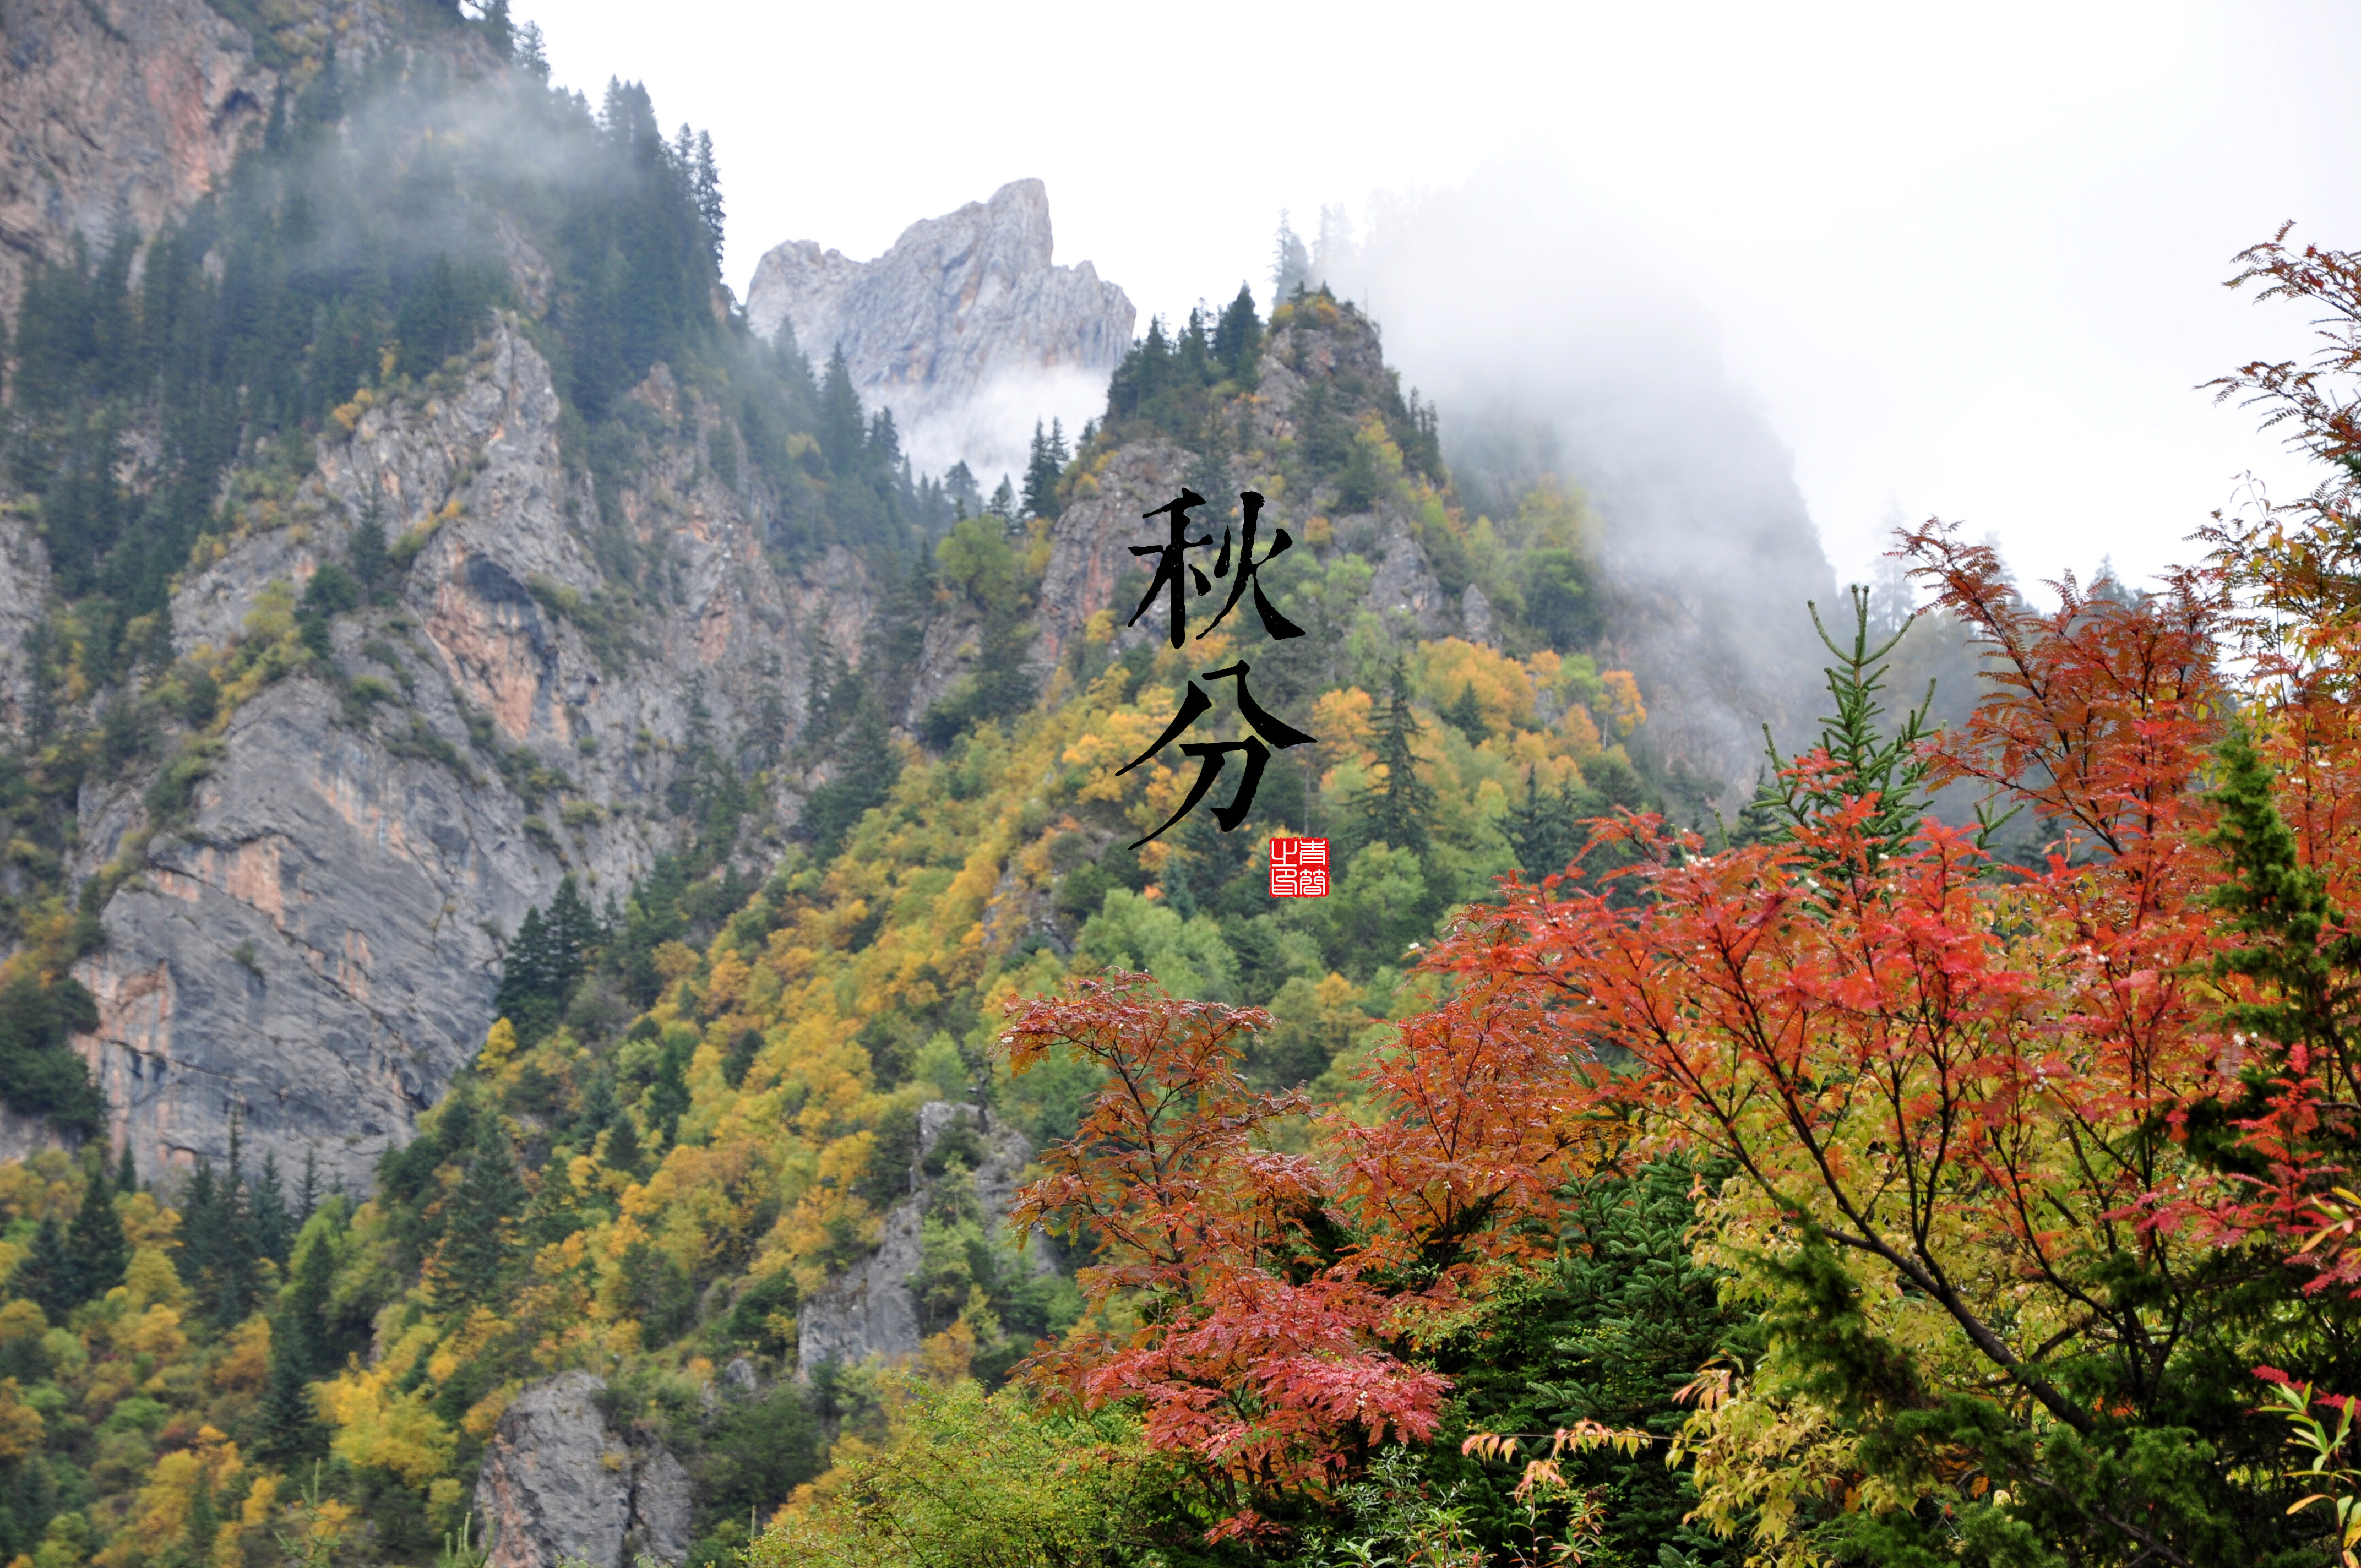 General 4288x2848 mountains nature fall rocks trees